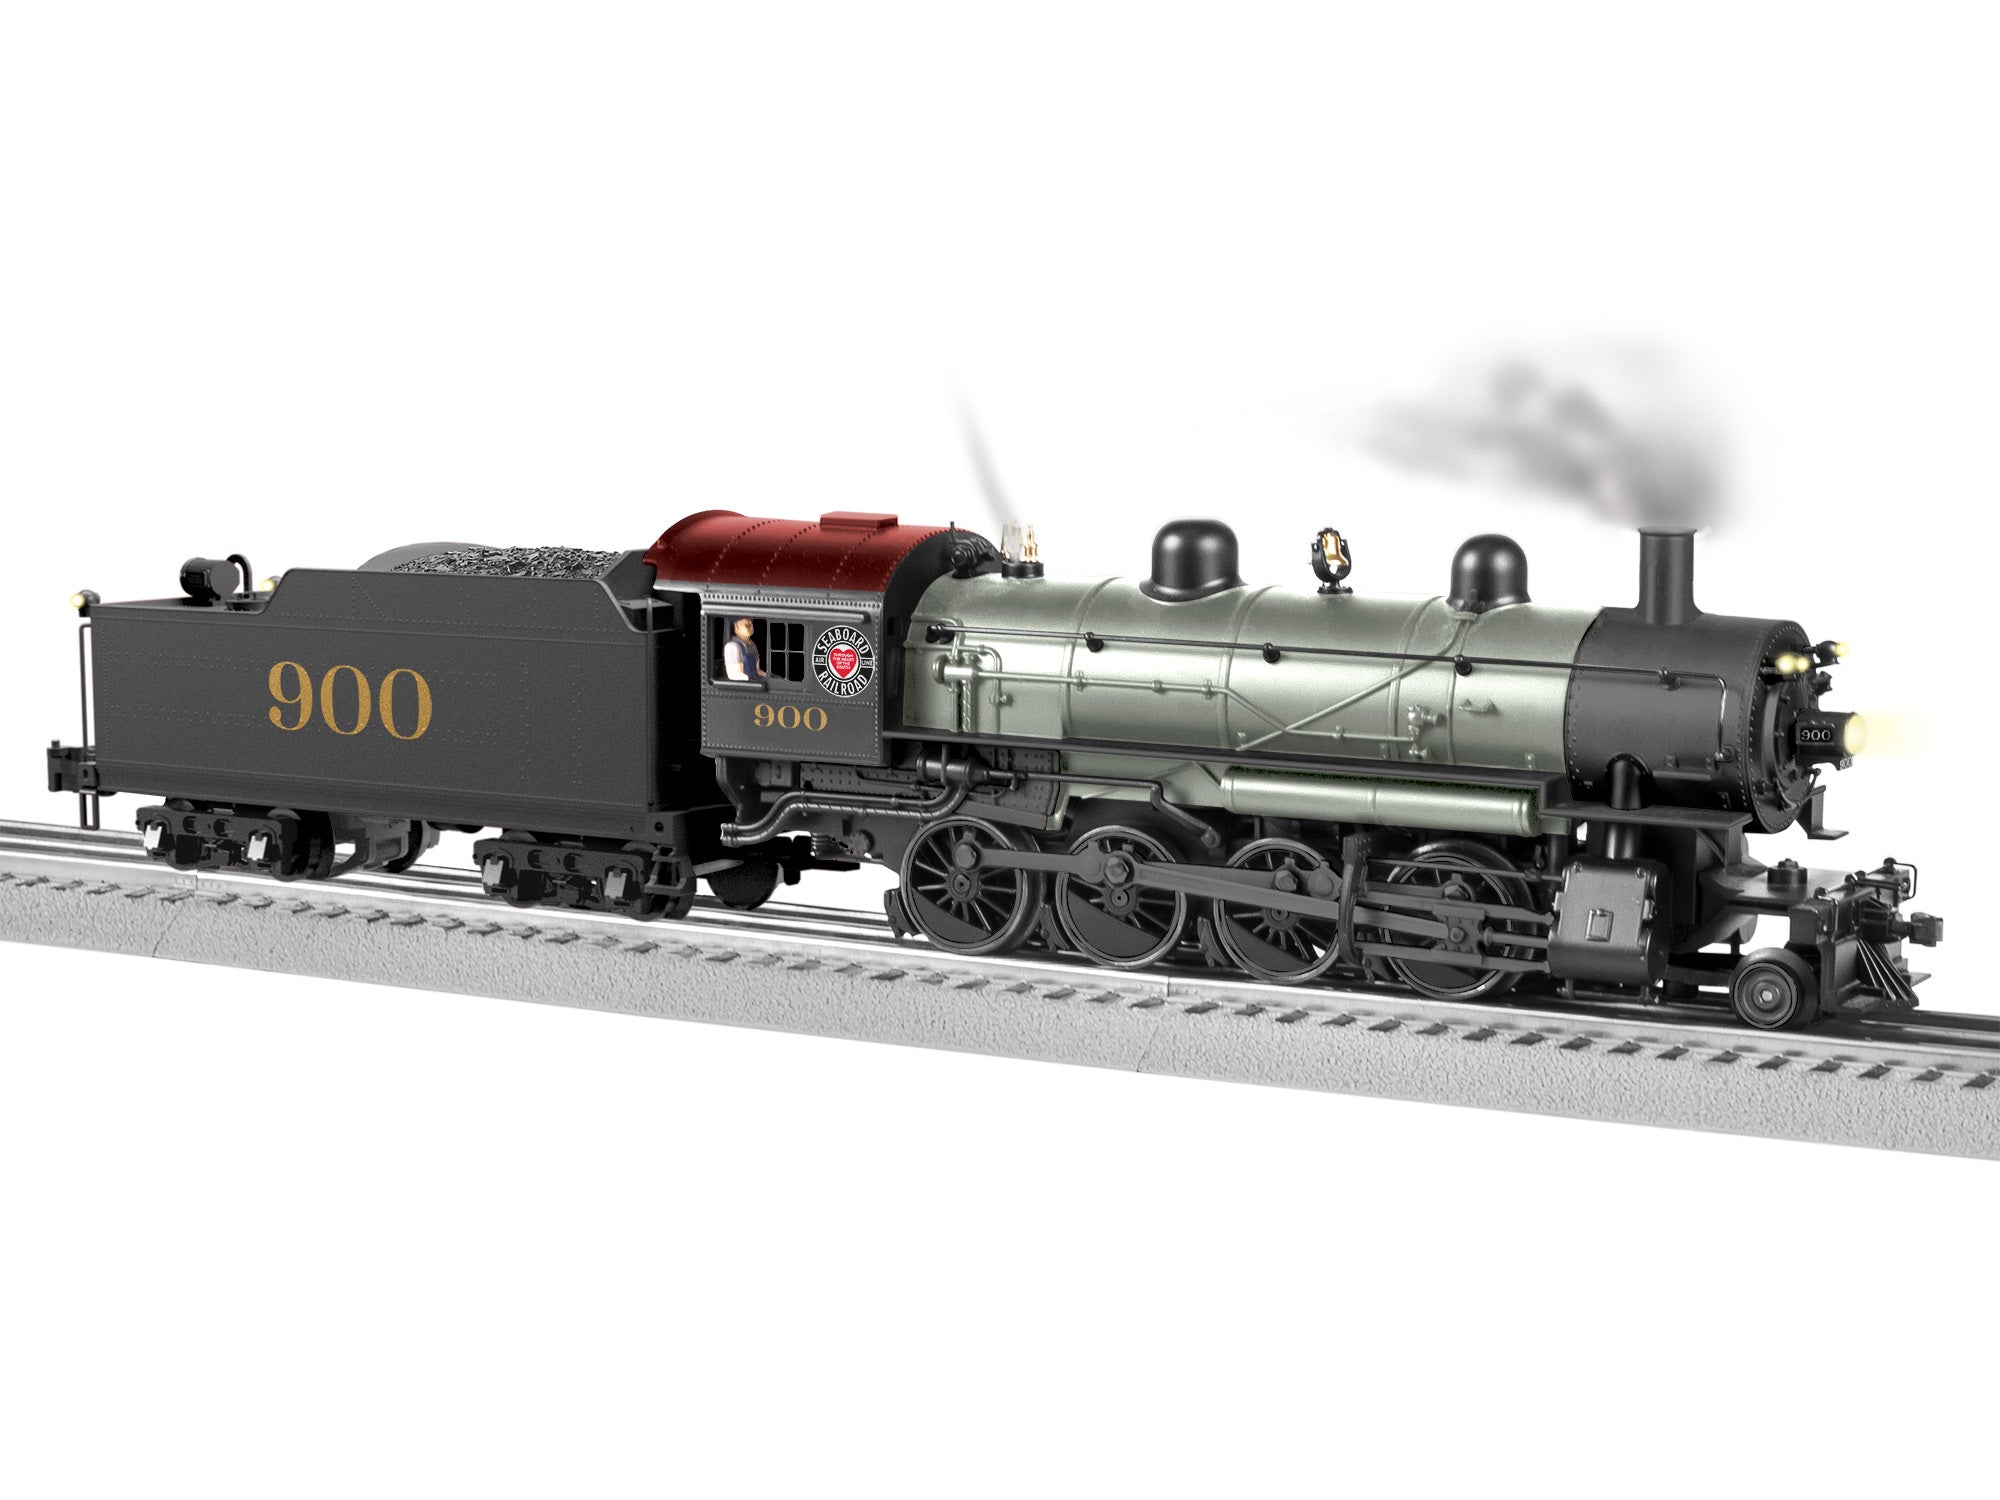 Lionel 2431390 - Legacy Consolidation Steam Engine "Seaboard Air Line" #900